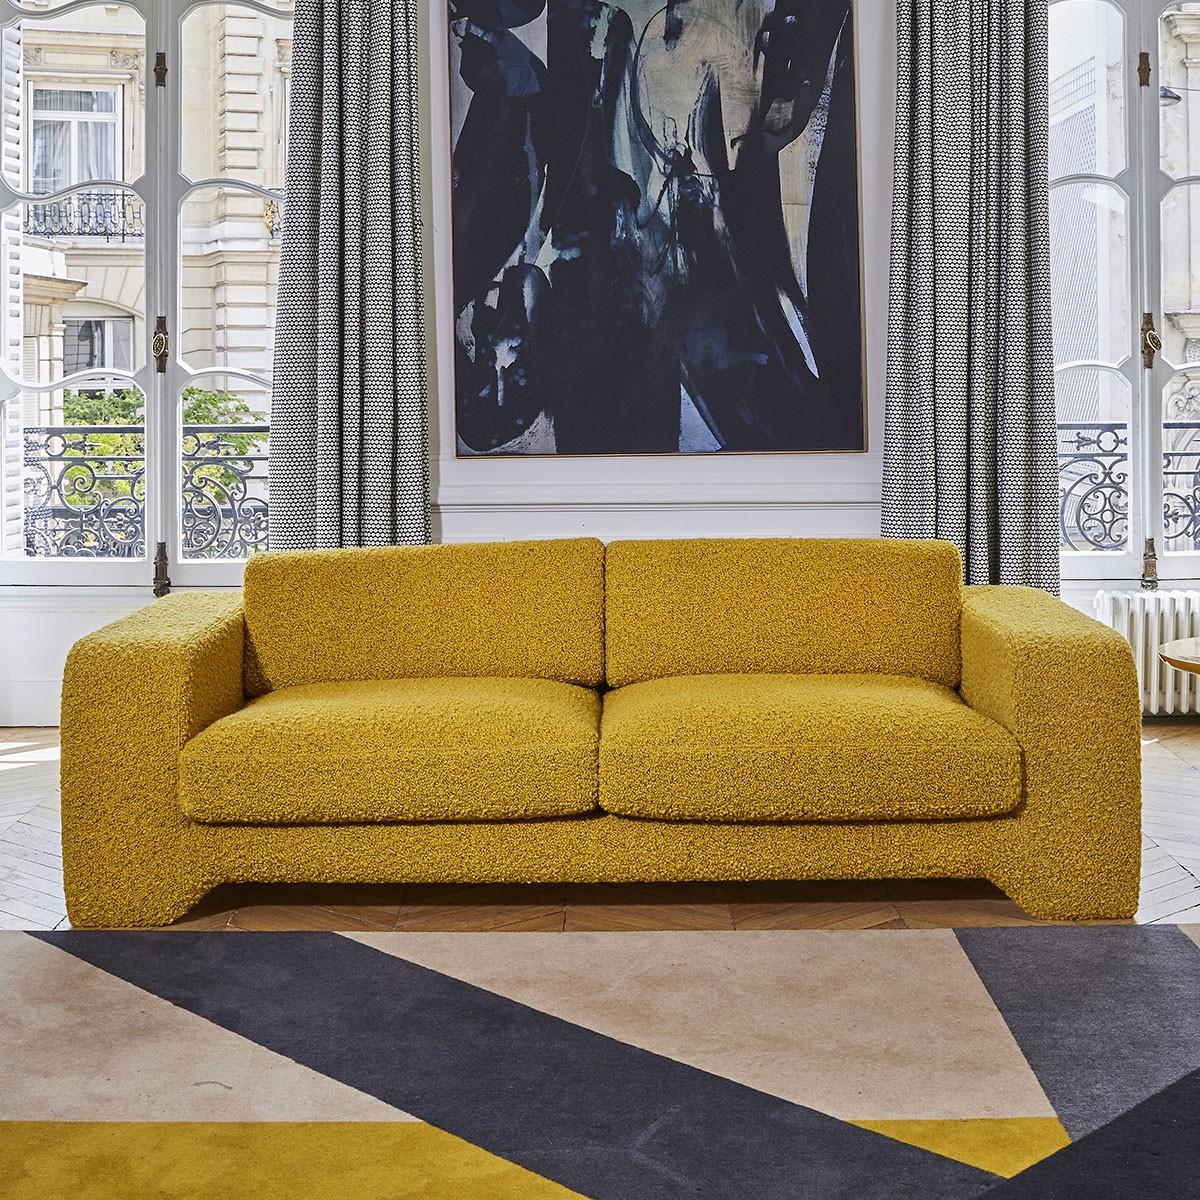 Popus Editions Giovanna 2.5 Seater Sofa in Saffron Antwerp Linen Upholstery

Giovanna is a sofa with a strong profile. A sober, plush line, with this famous detail that changes everything, so as not to forget its strength of character and this